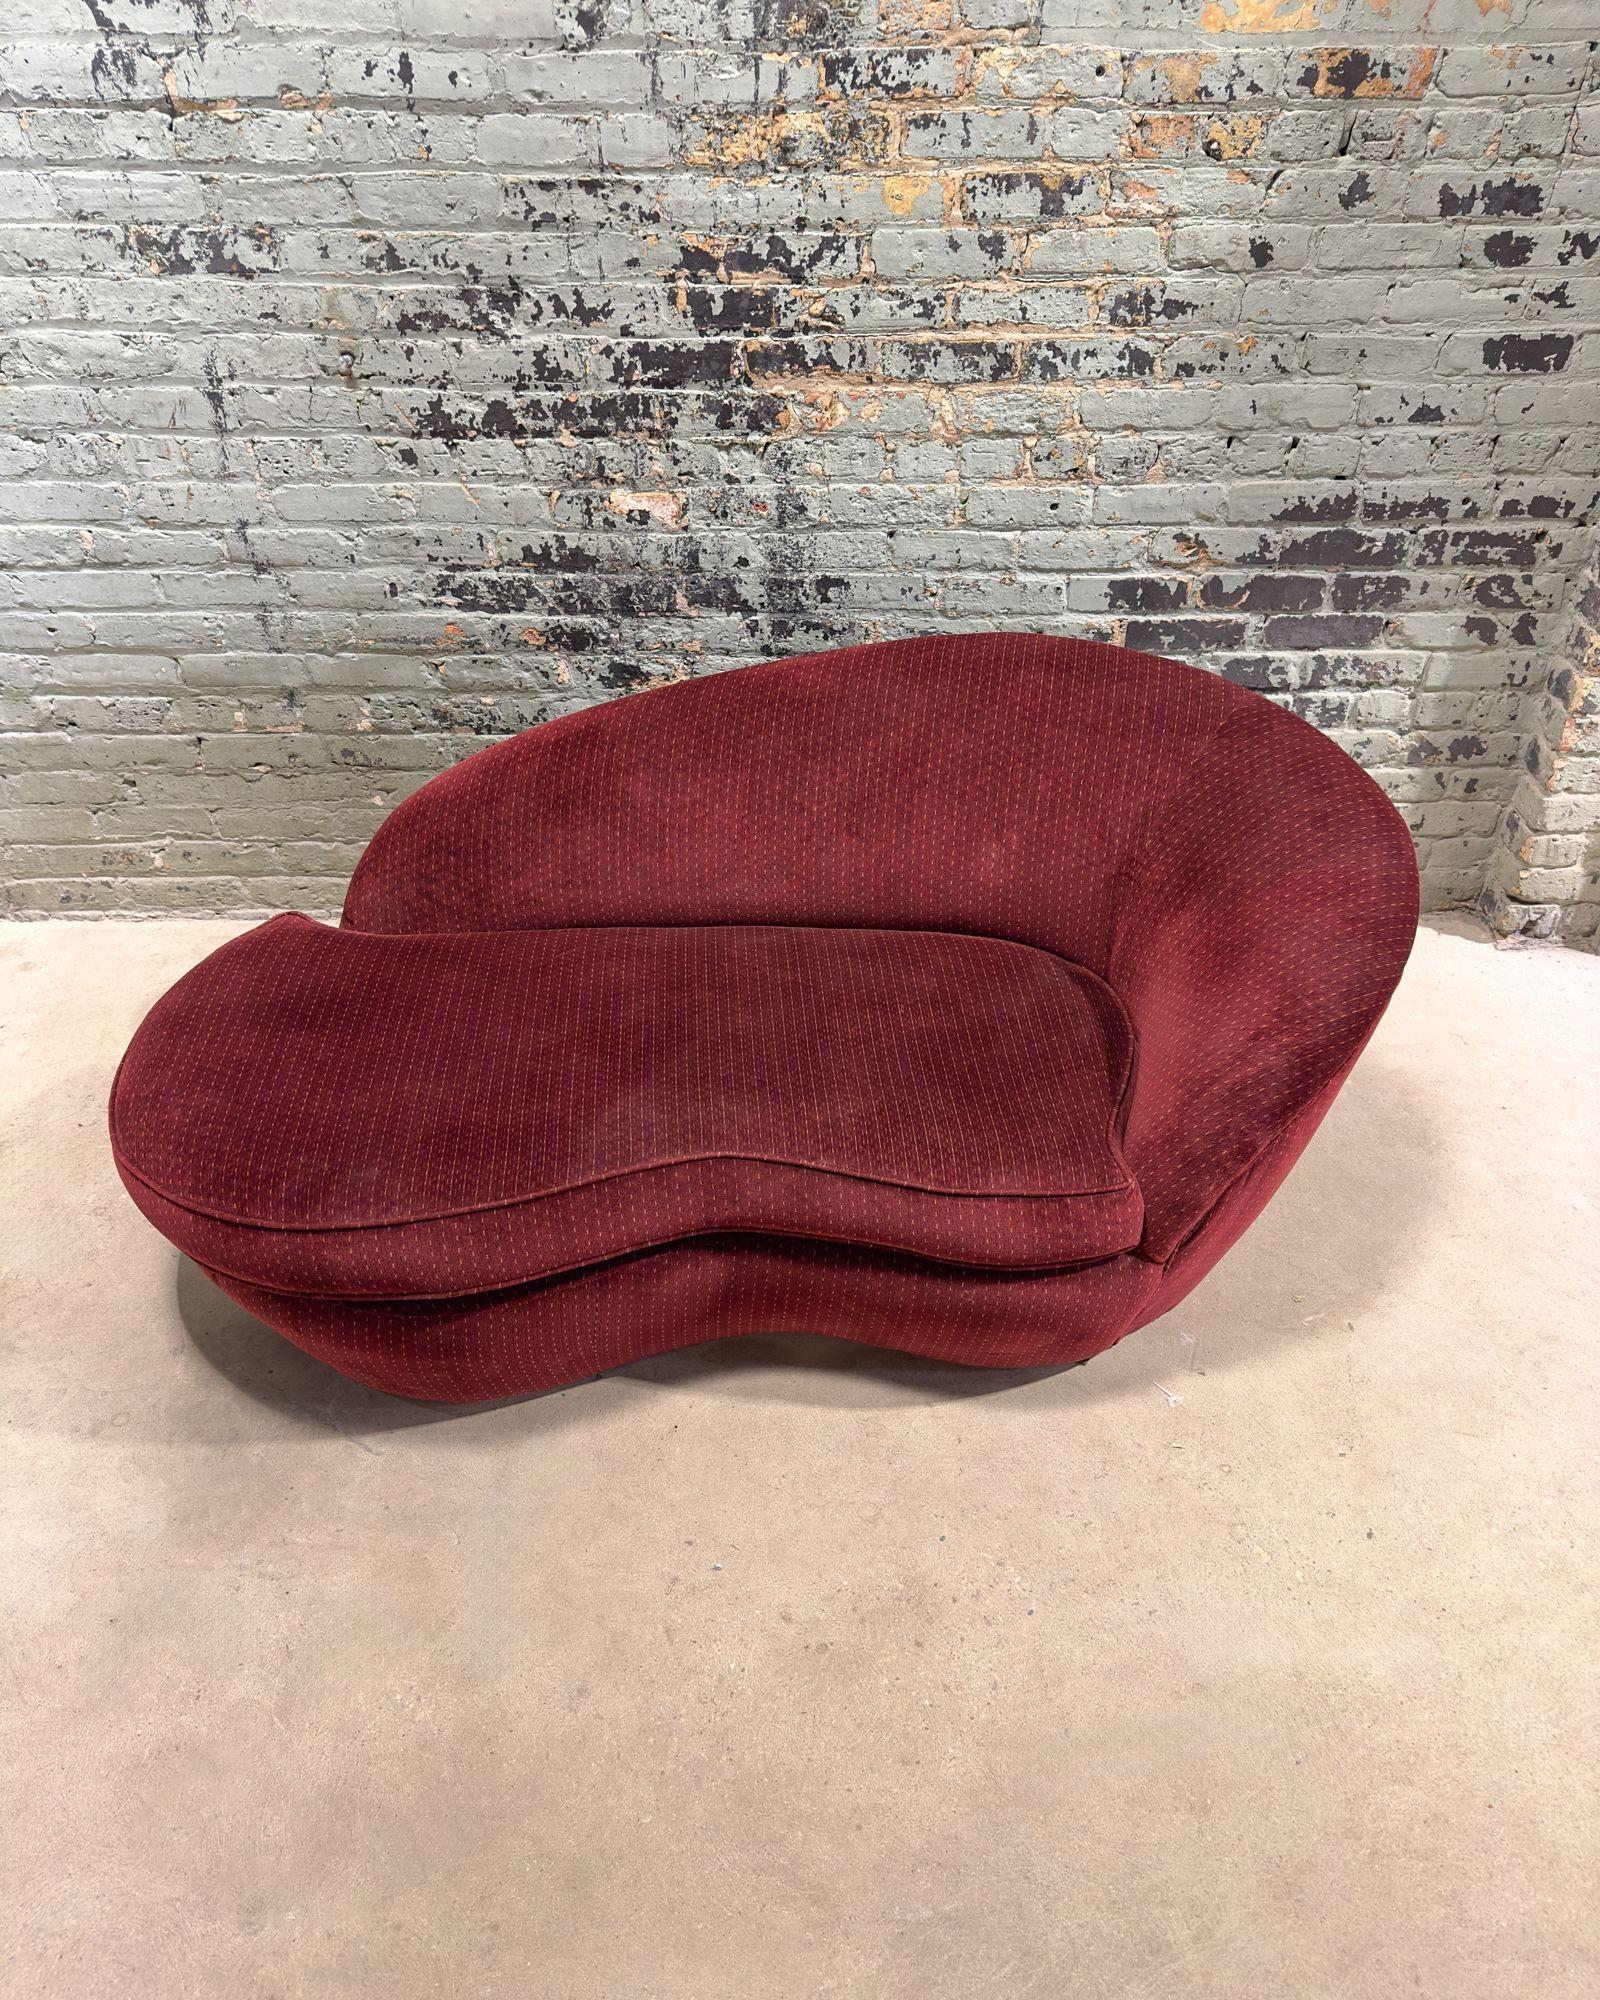 Vladimir Kagan Style Curved Sofa/Chaise Lounge, 1960 For Sale 1